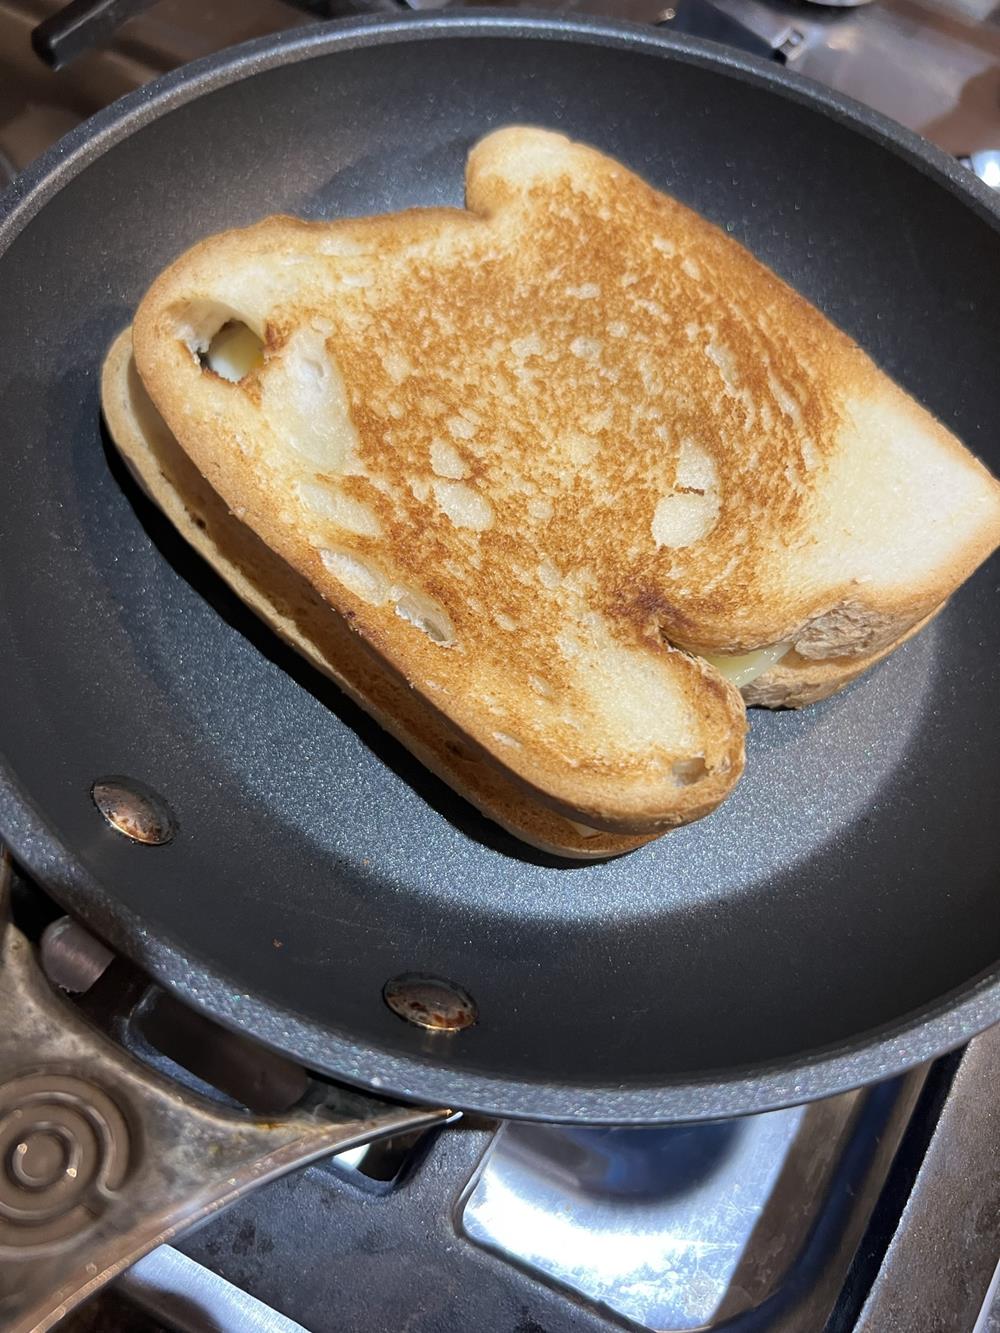 grilled peanut butter and cheese sandwich cooking in a pan